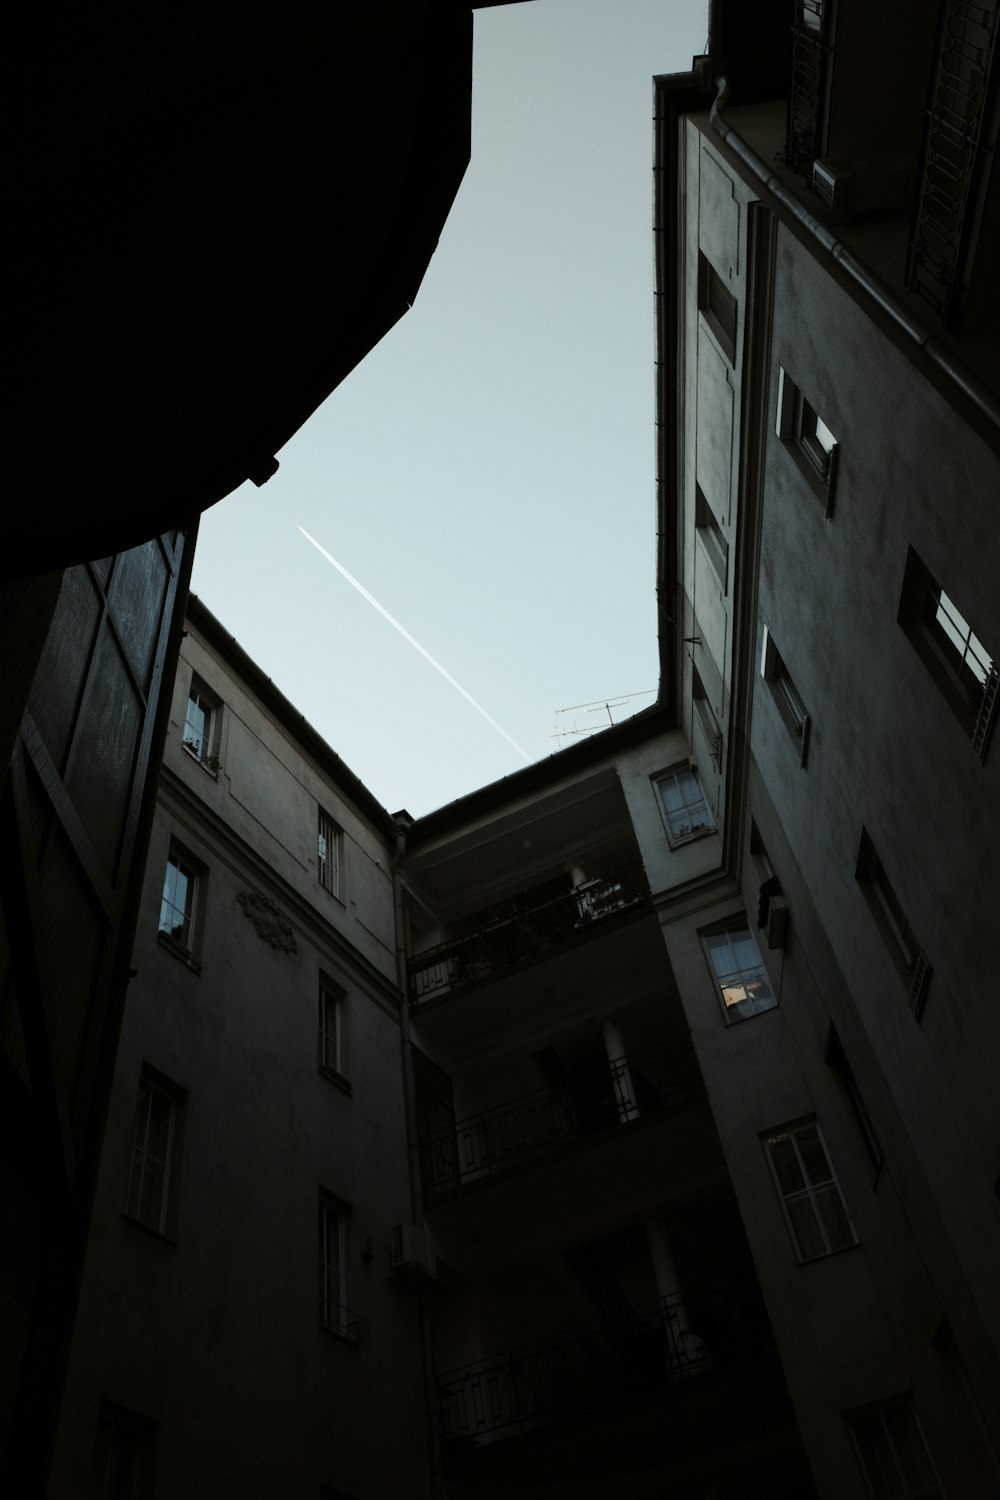 an upward view of a building with a plane in the sky